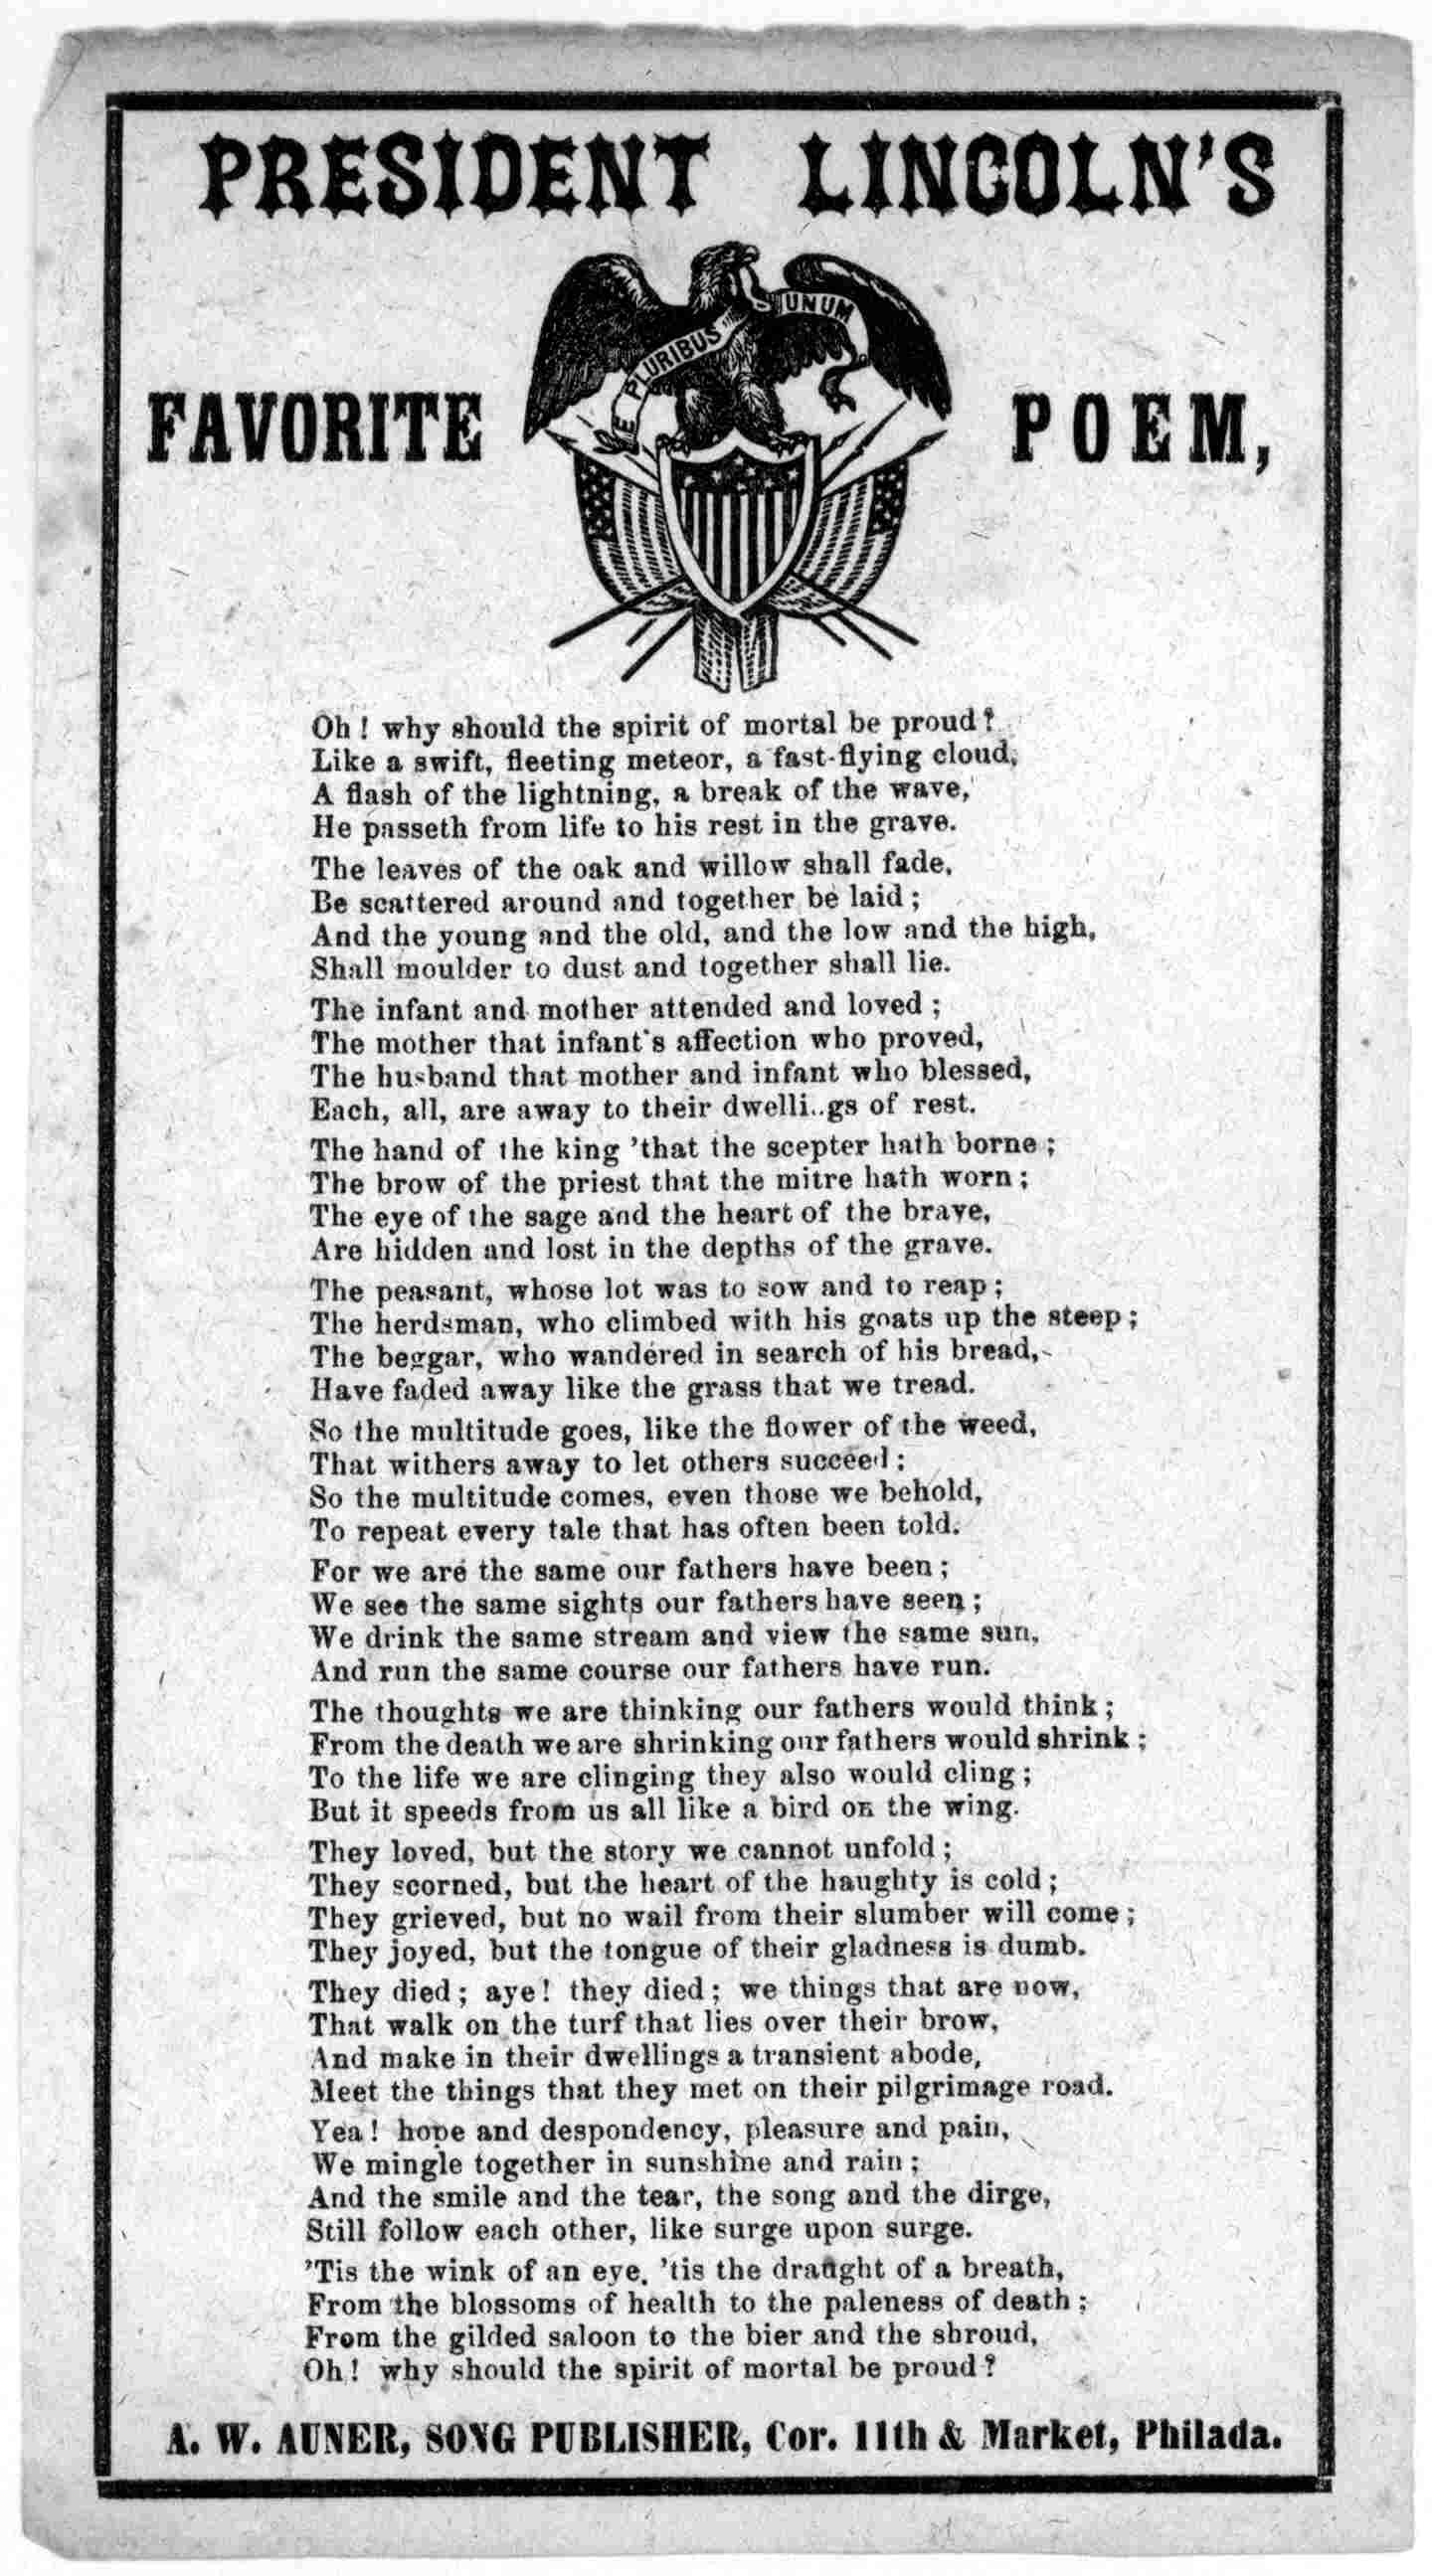 A printing of what is called President Lincoln's favorite poem.